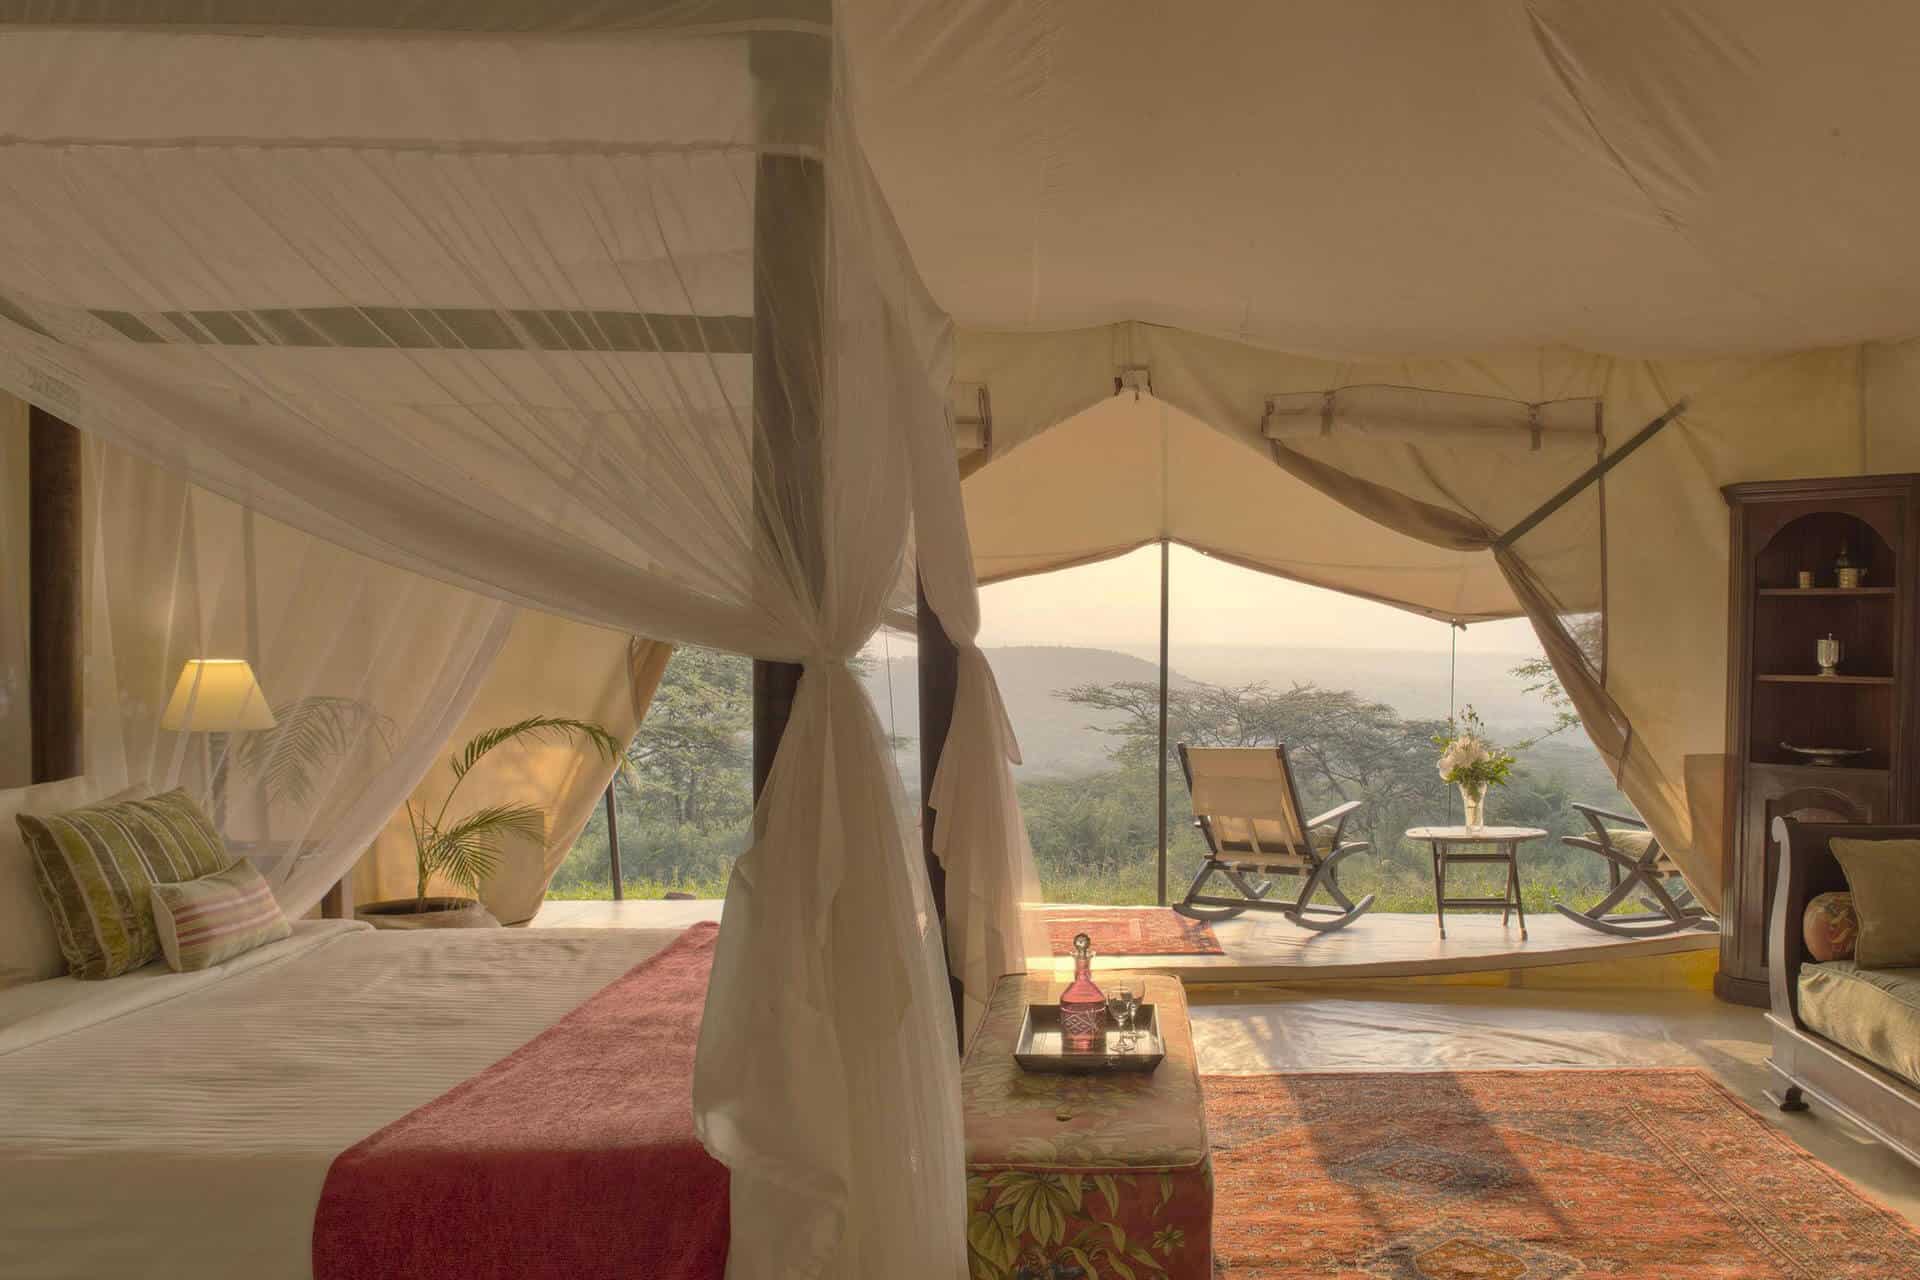 Tented Suite at Cottars 1920's Camp - which is also the featured image for Christmas in East Africa journal